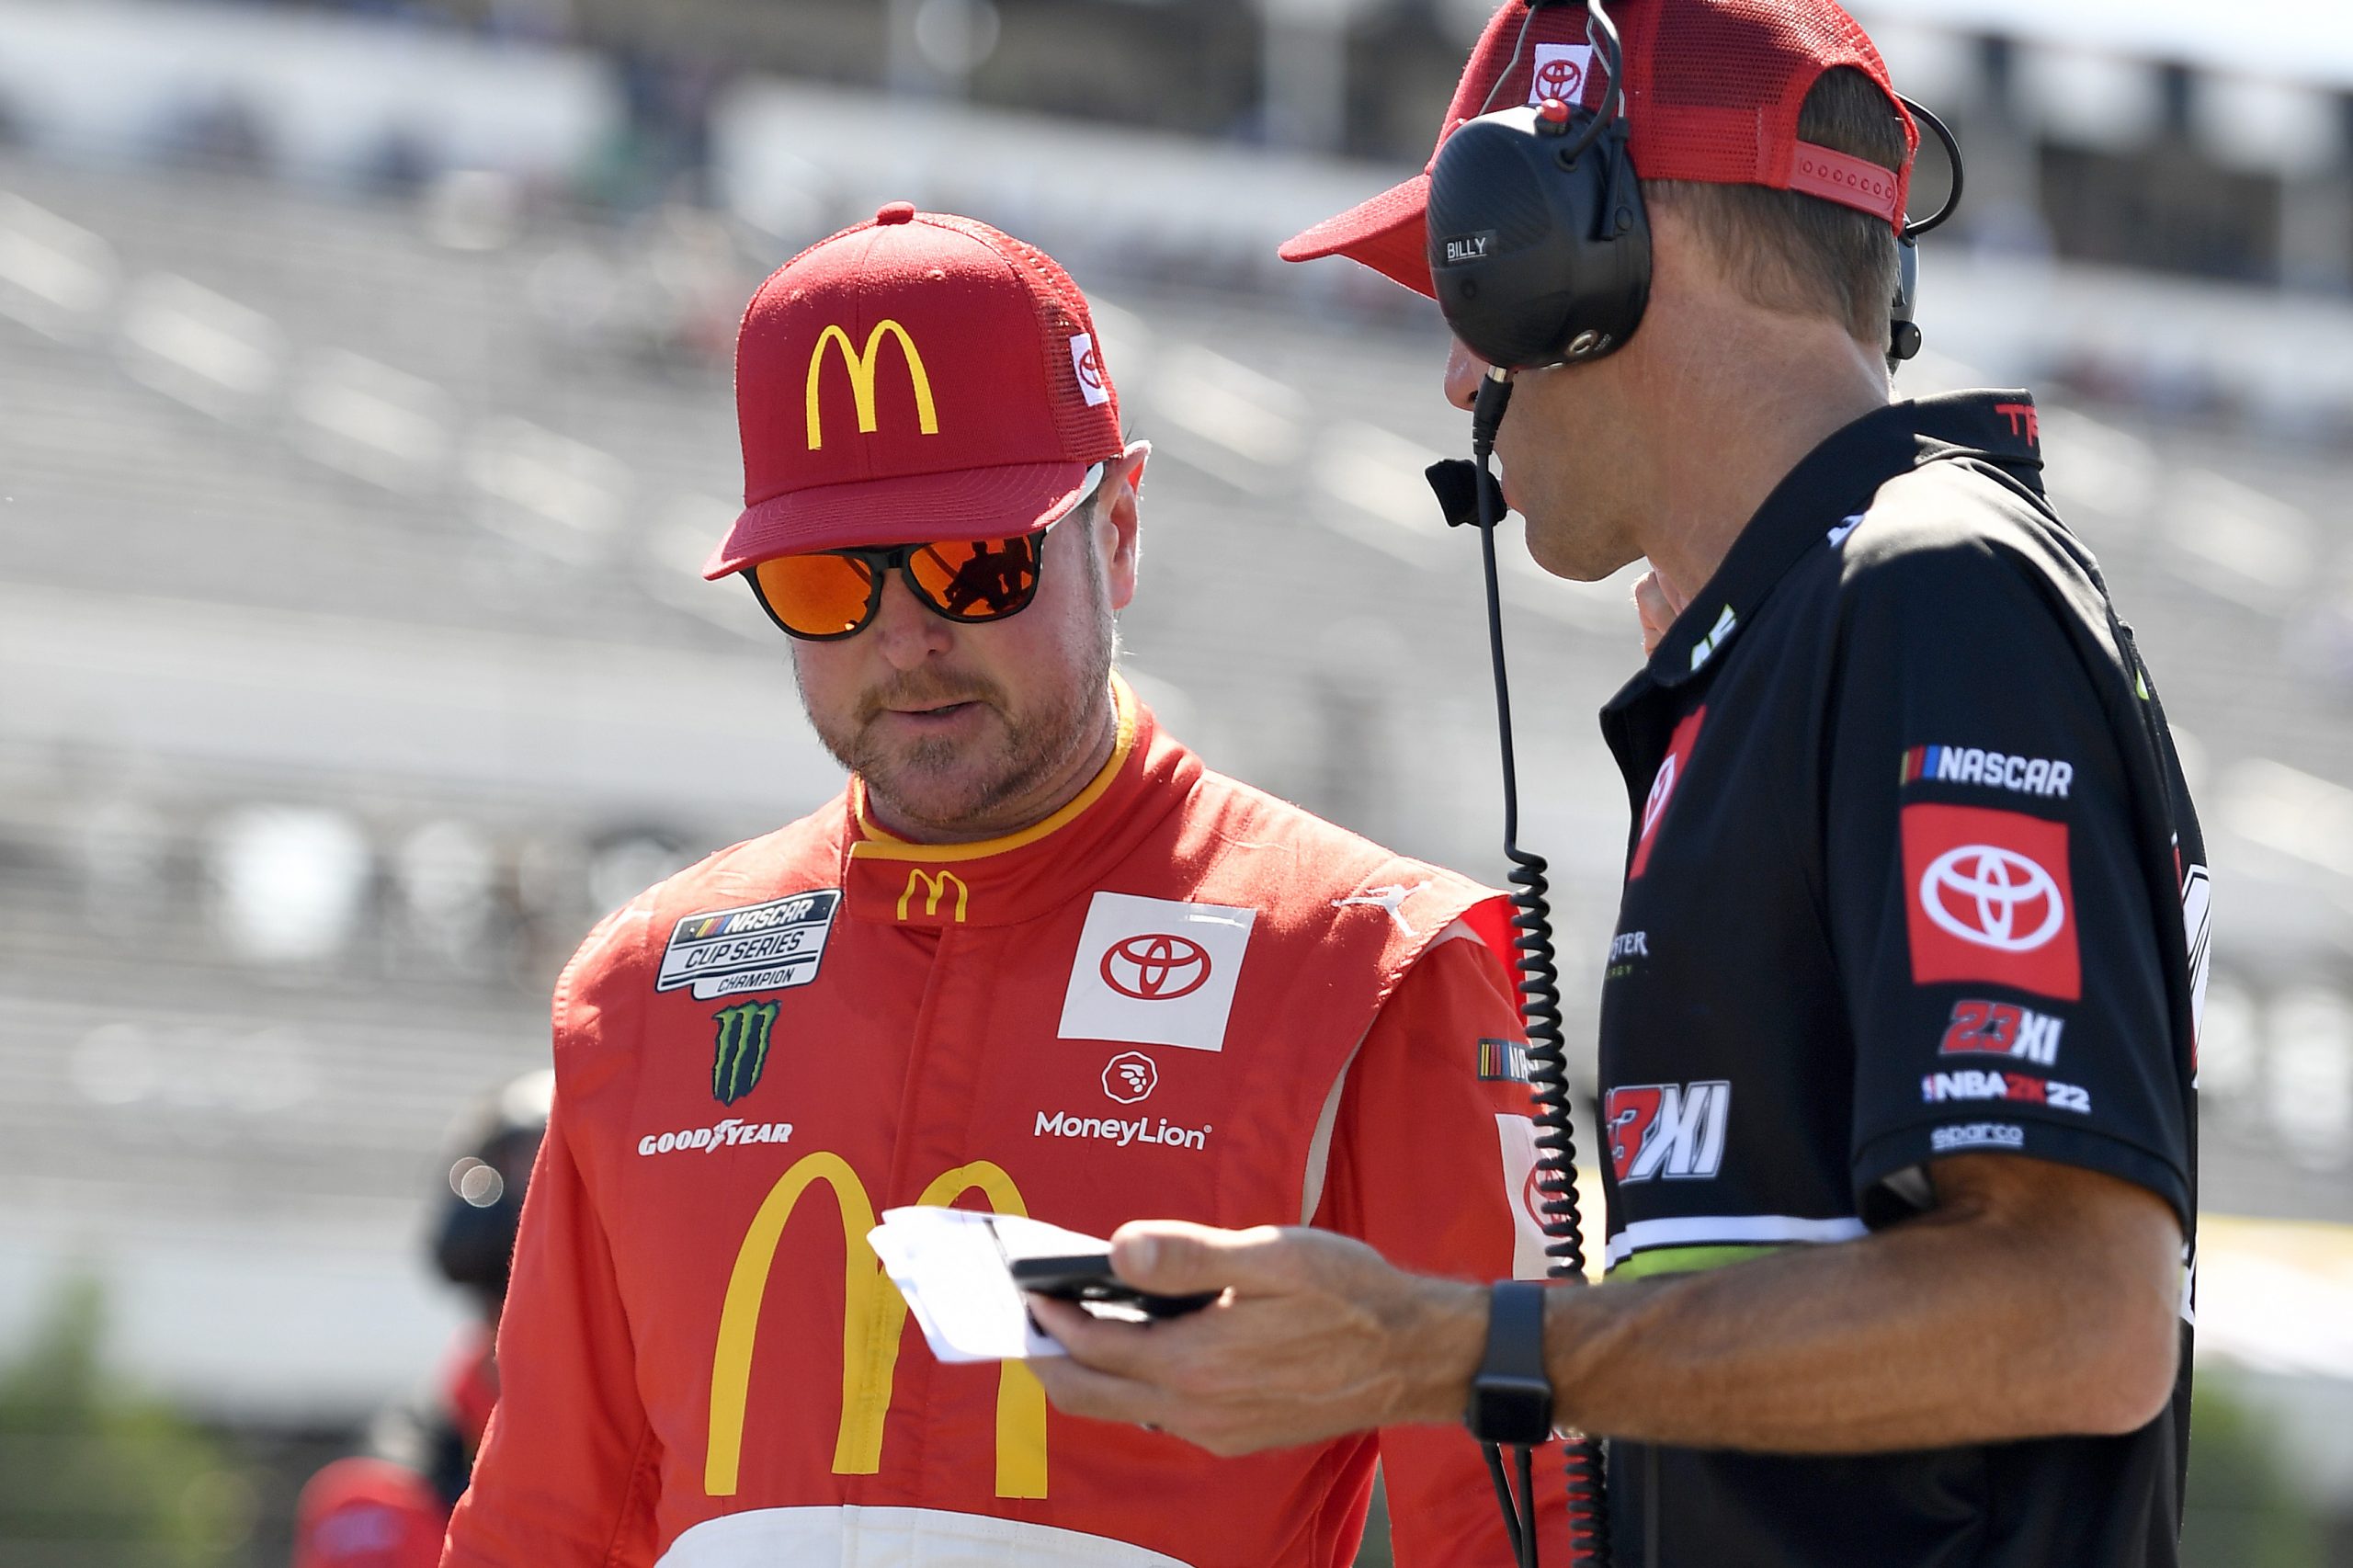 LONG POND, PENNSYLVANIA - JULY 23: Kurt Busch, driver of the #45 McDonald's Toyota, works with a crew member during qualifying for the NASCAR Cup Series M&M's Fan Appreciation 400 at Pocono Raceway on July 23, 2022 in Long Pond, Pennsylvania. (Photo by Logan Riely/Getty Images)